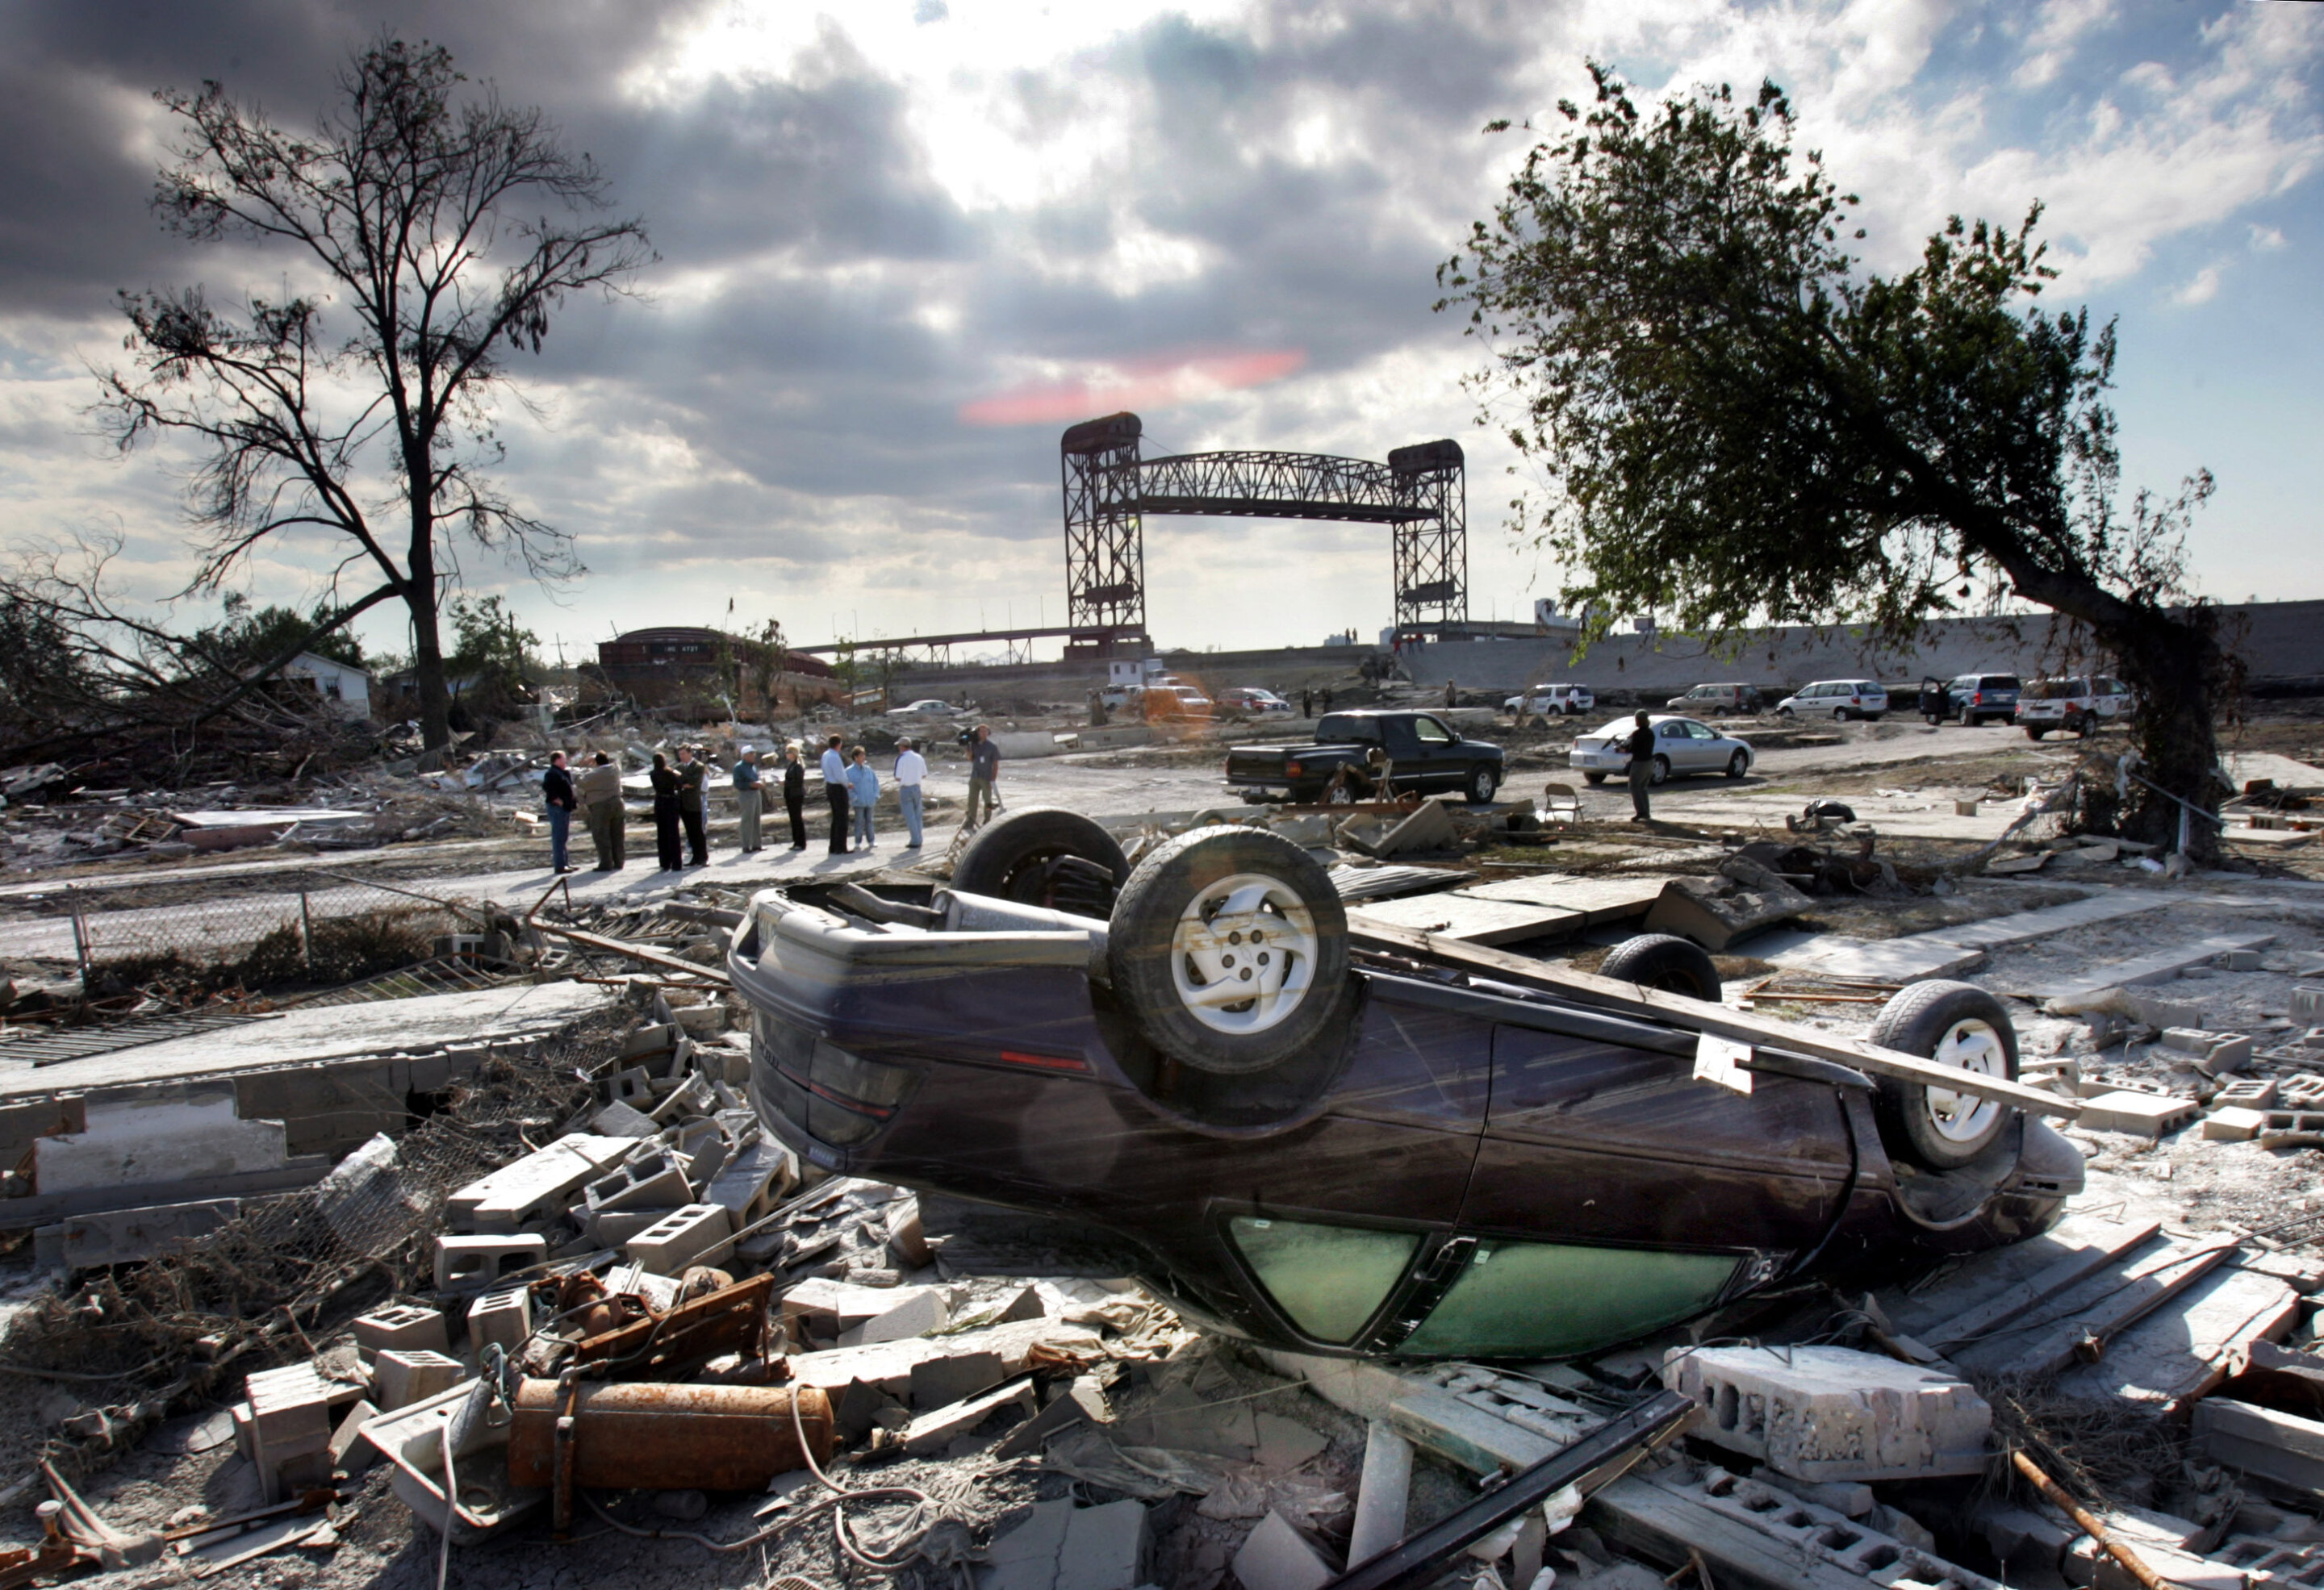 #17 years post-Katrina, New Orleans-area protections complete